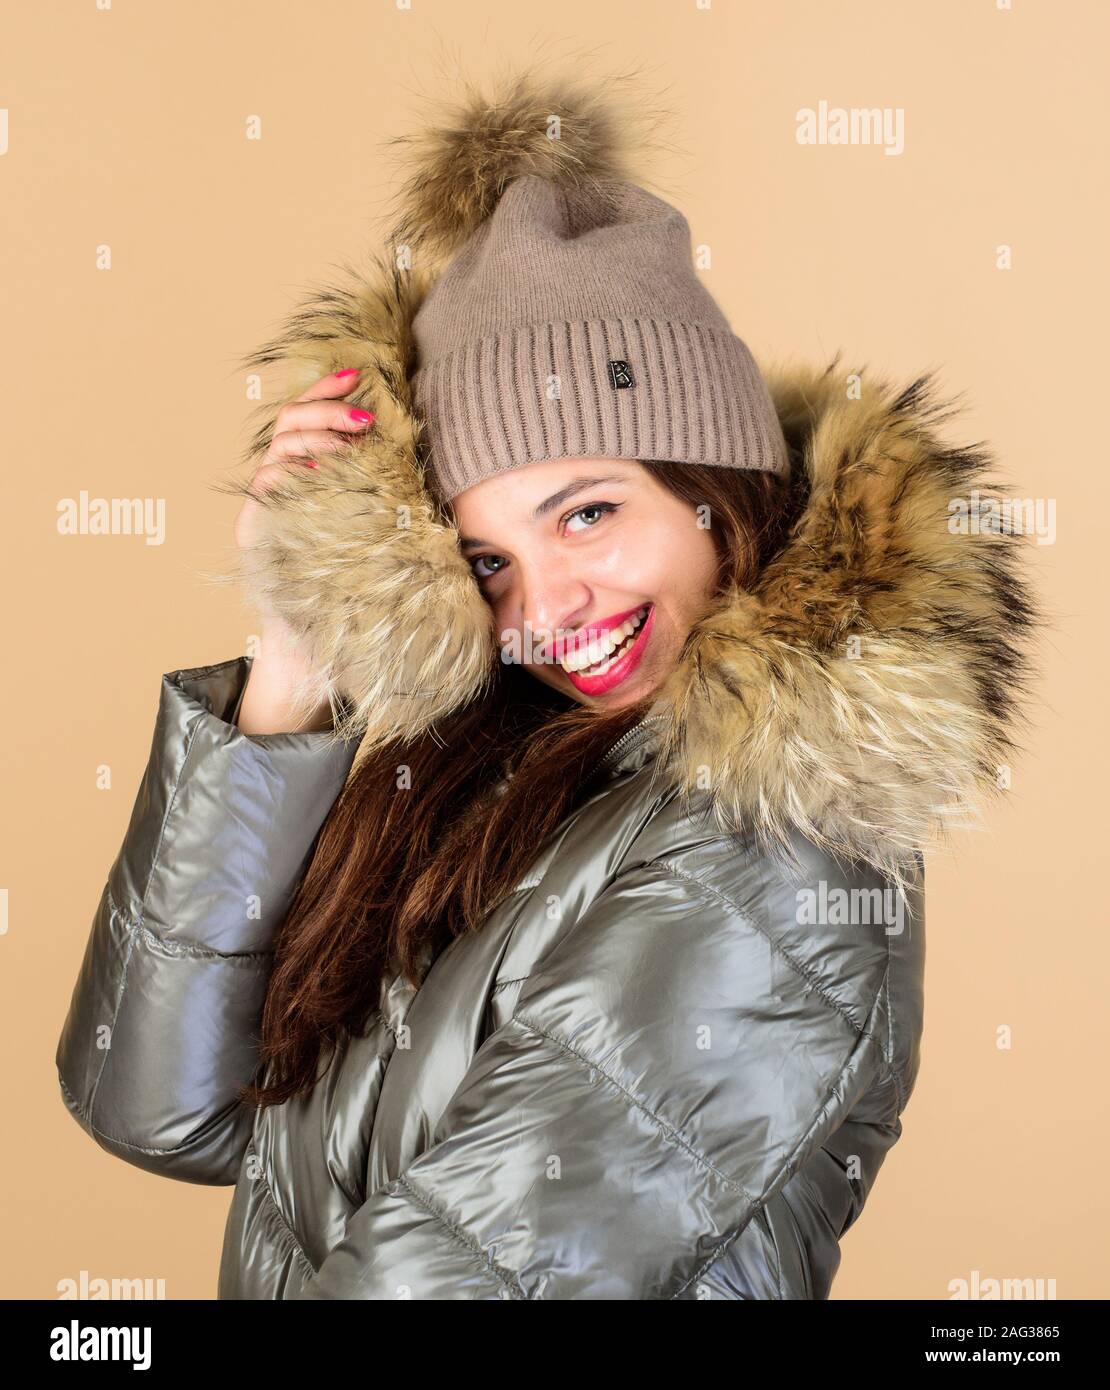 Confidence and femininity. Be stylish this winter. Emotional woman in  jacket. Winter outfit. Enjoying her outfit. Pretty girl wear fashion outfit  for cold weather. Playful fashionista. Black friday Stock Photo - Alamy